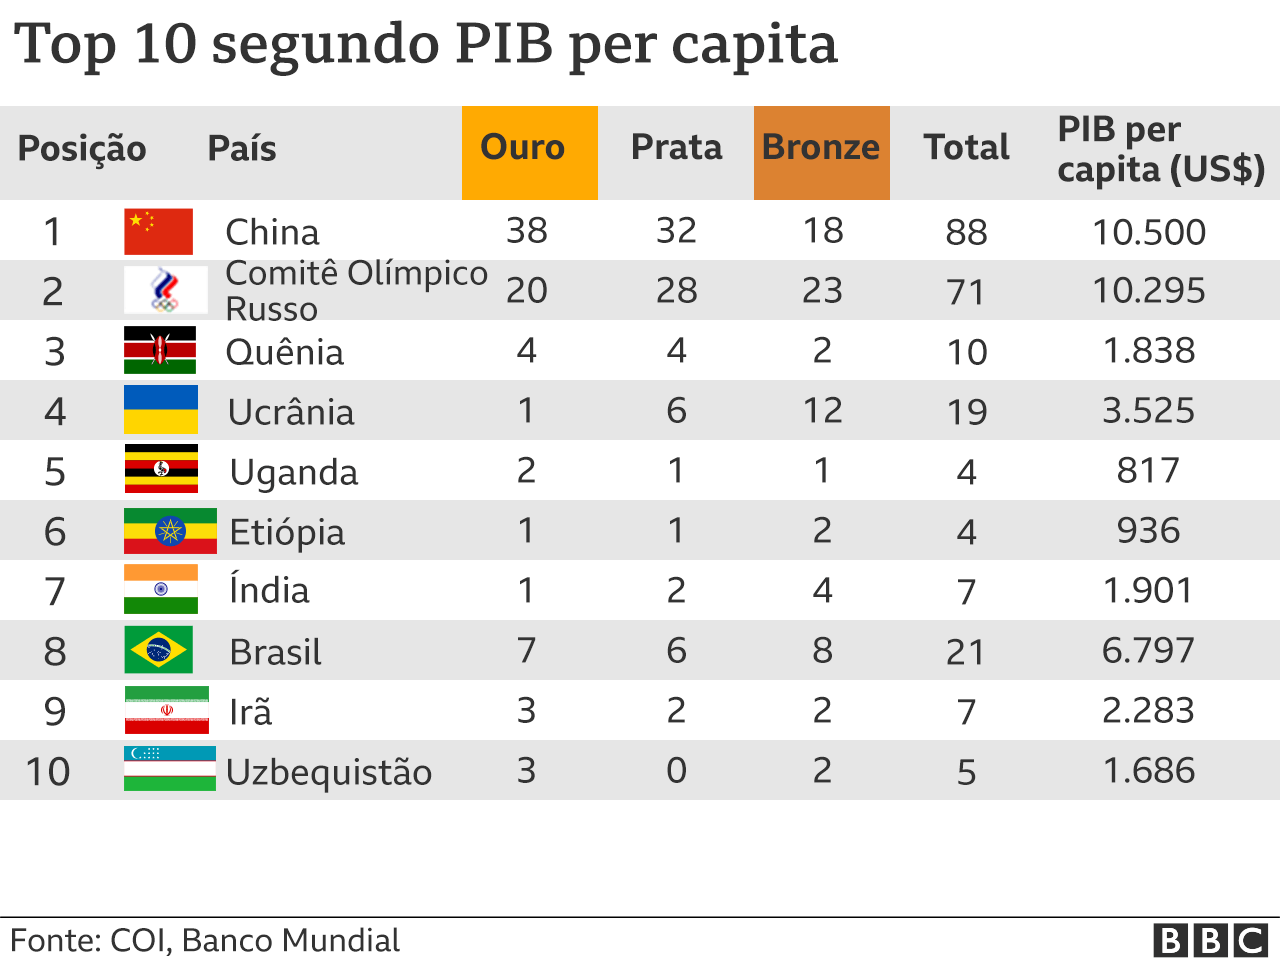 The table shows the medals table per capita of GDP.